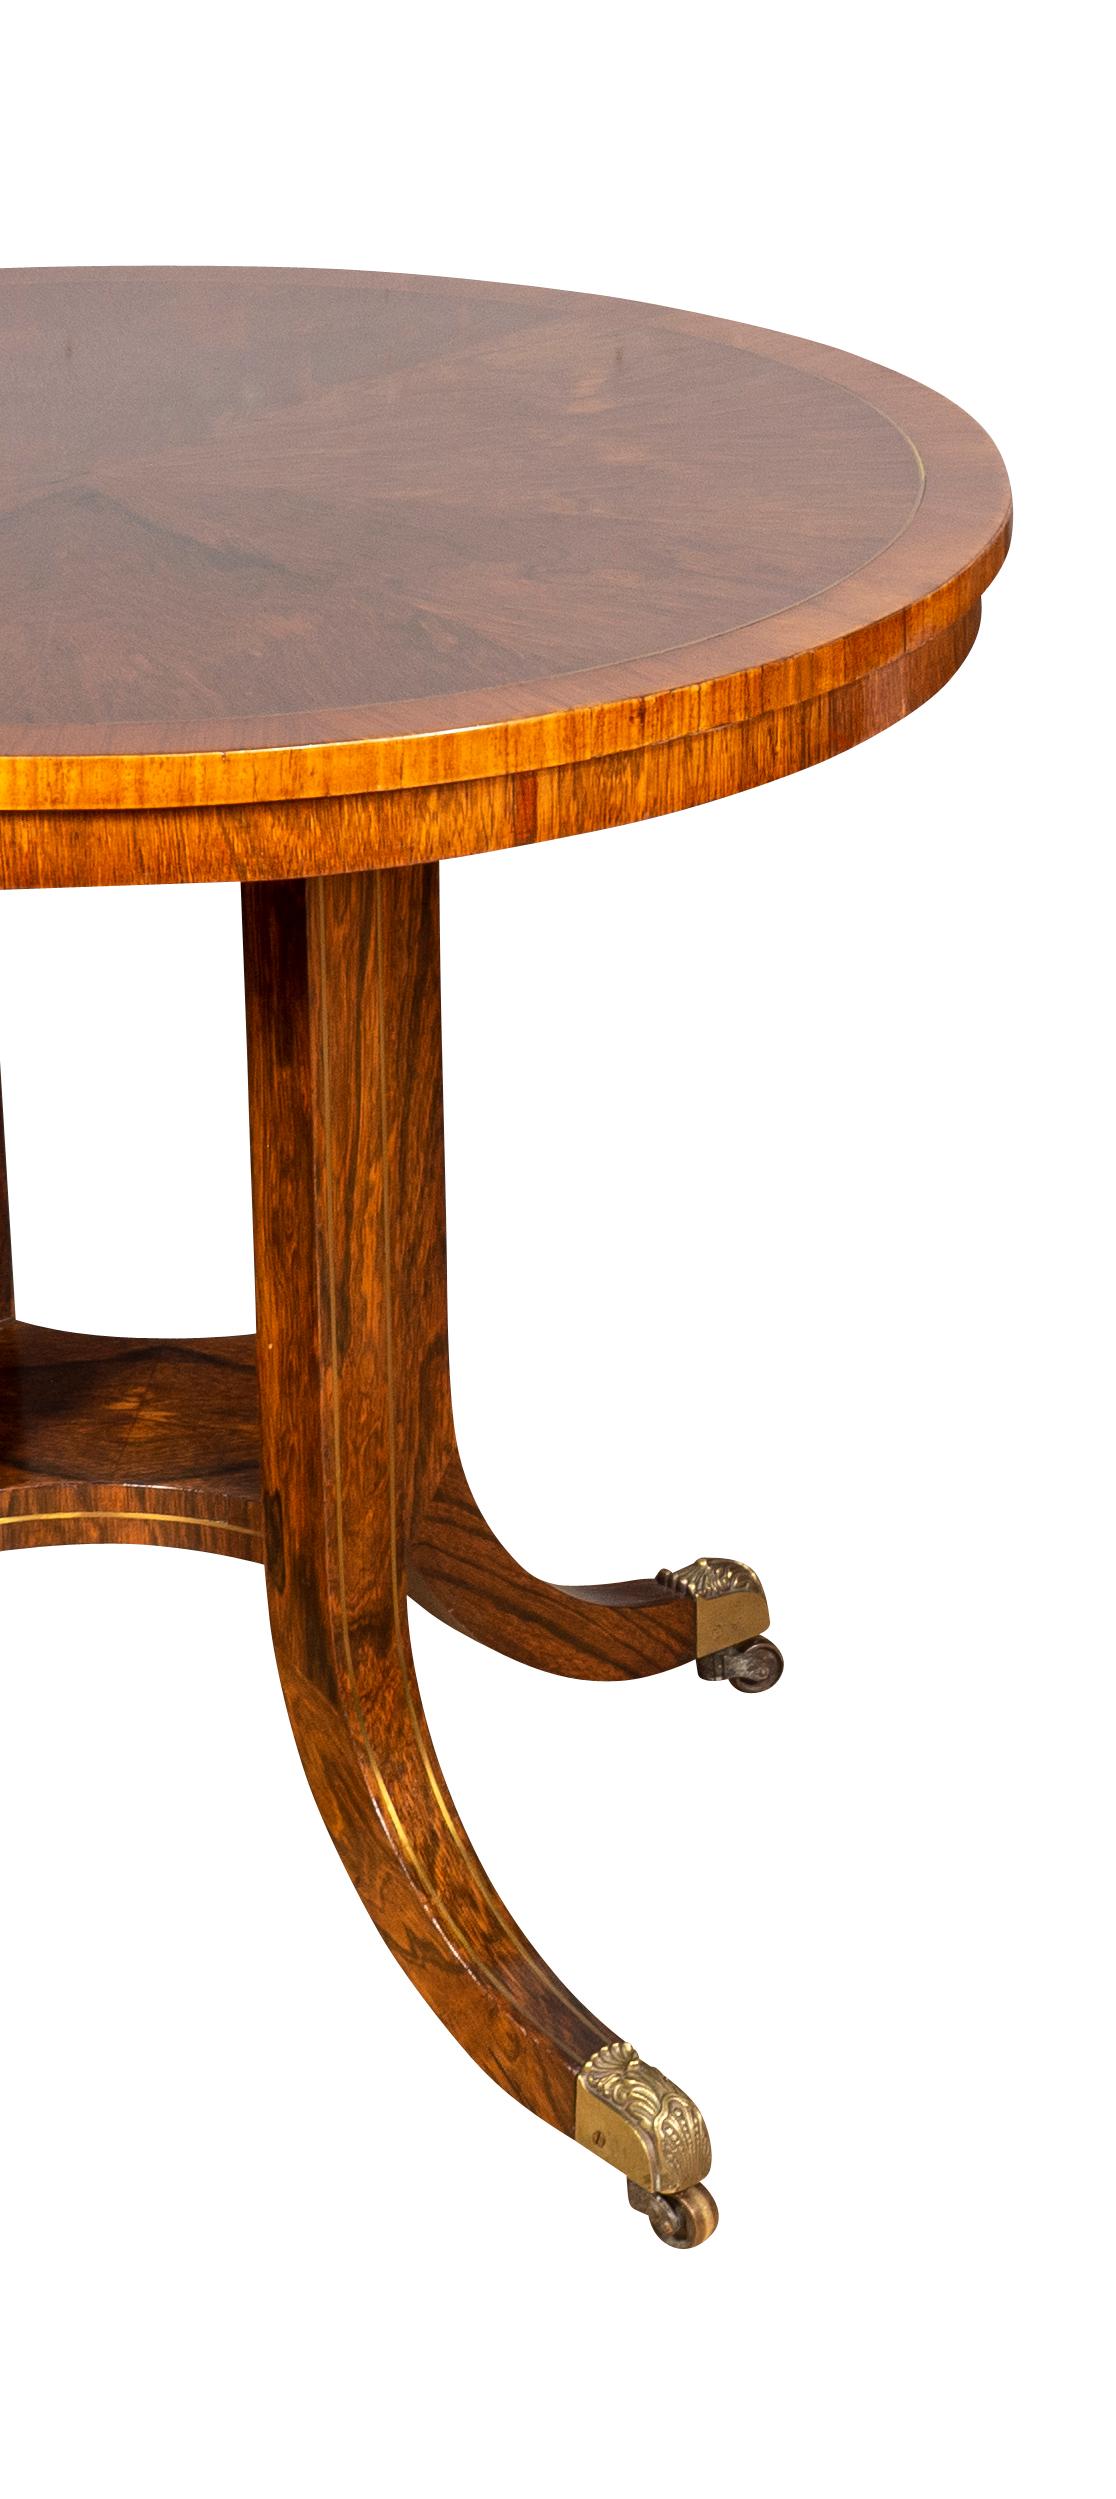 19th Century Pair of Regency Style Rosewood and Brass Inlaid Tables